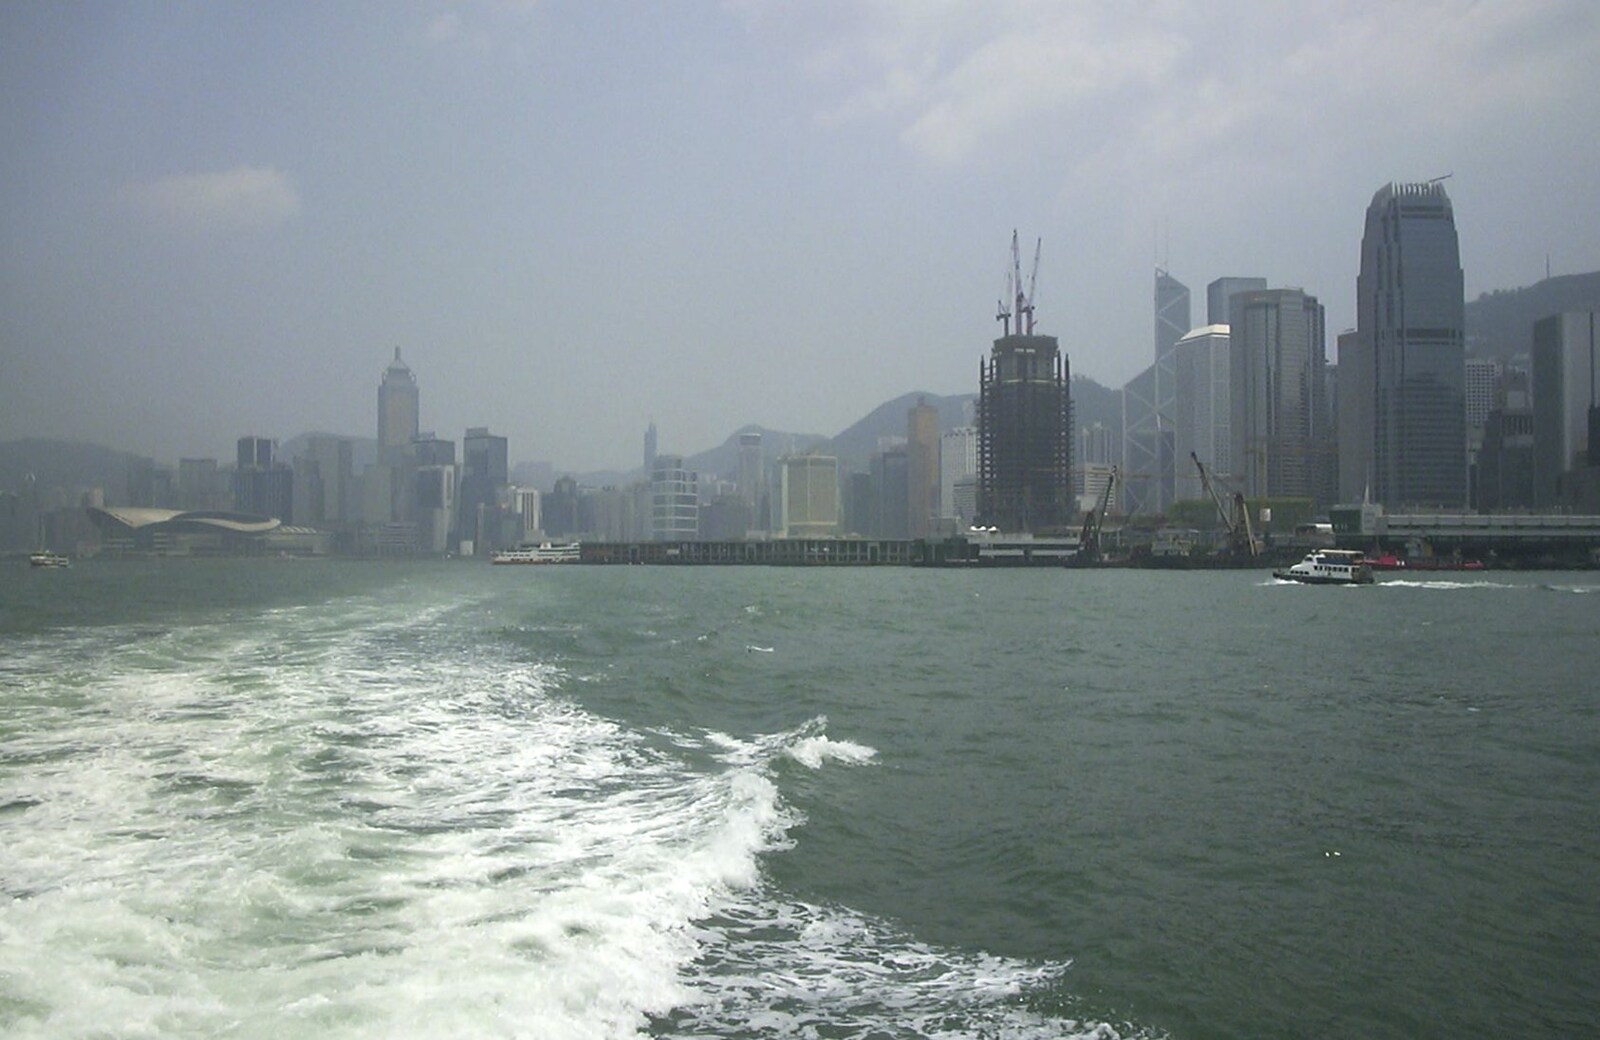 Lamma Island, Hong Kong, China - 20th August 2001: Looking back from the ferry